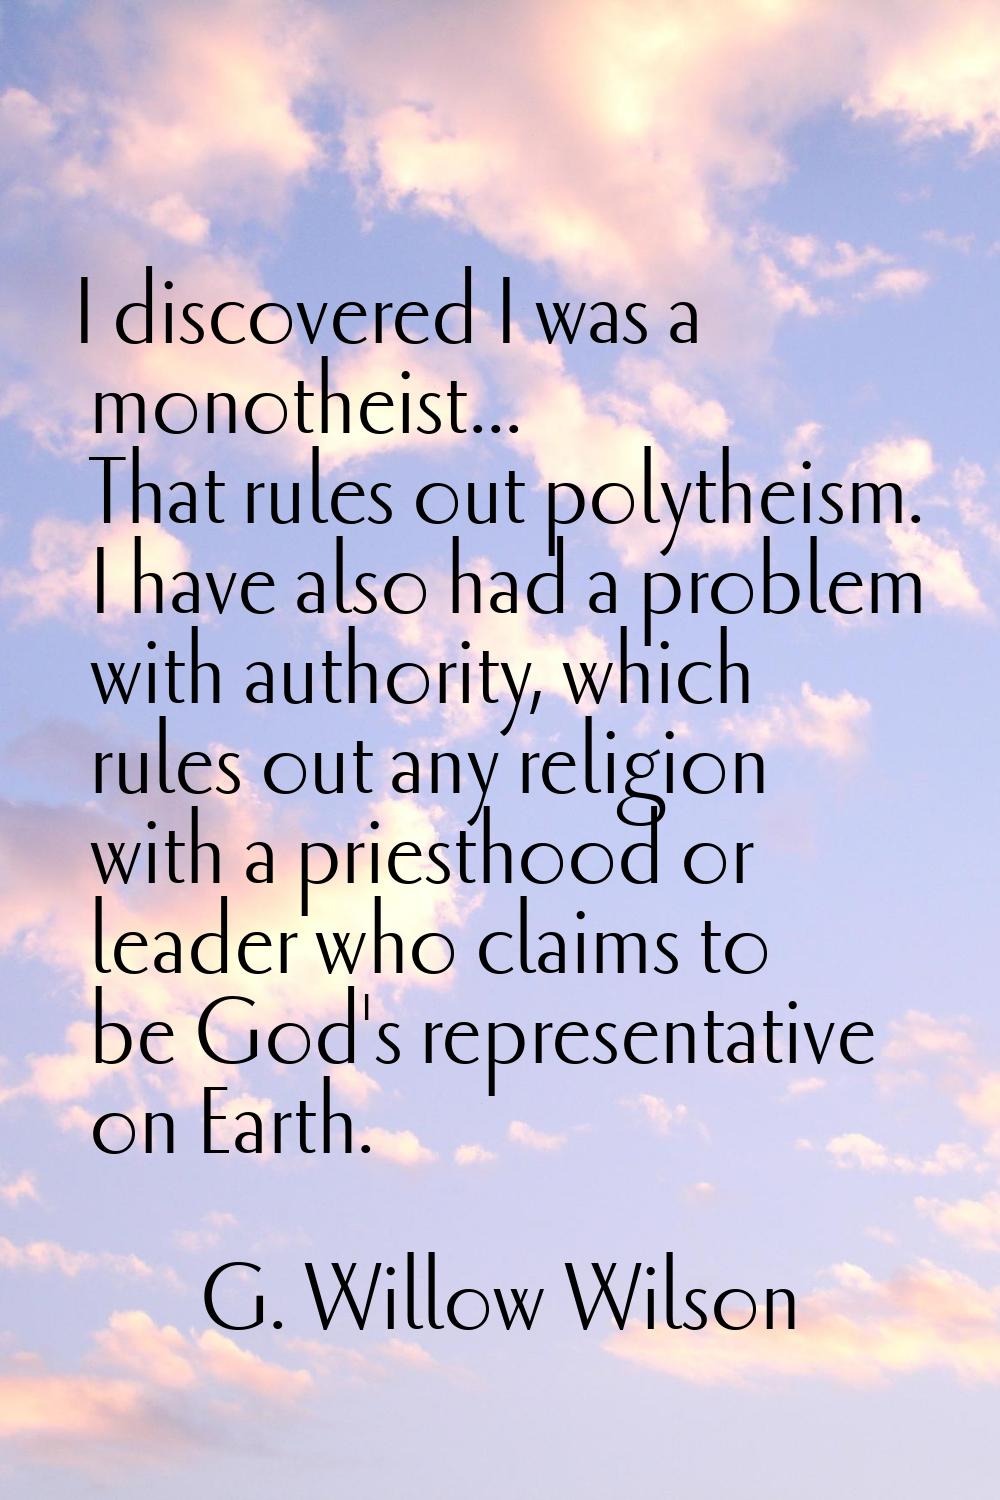 I discovered I was a monotheist... That rules out polytheism. I have also had a problem with author